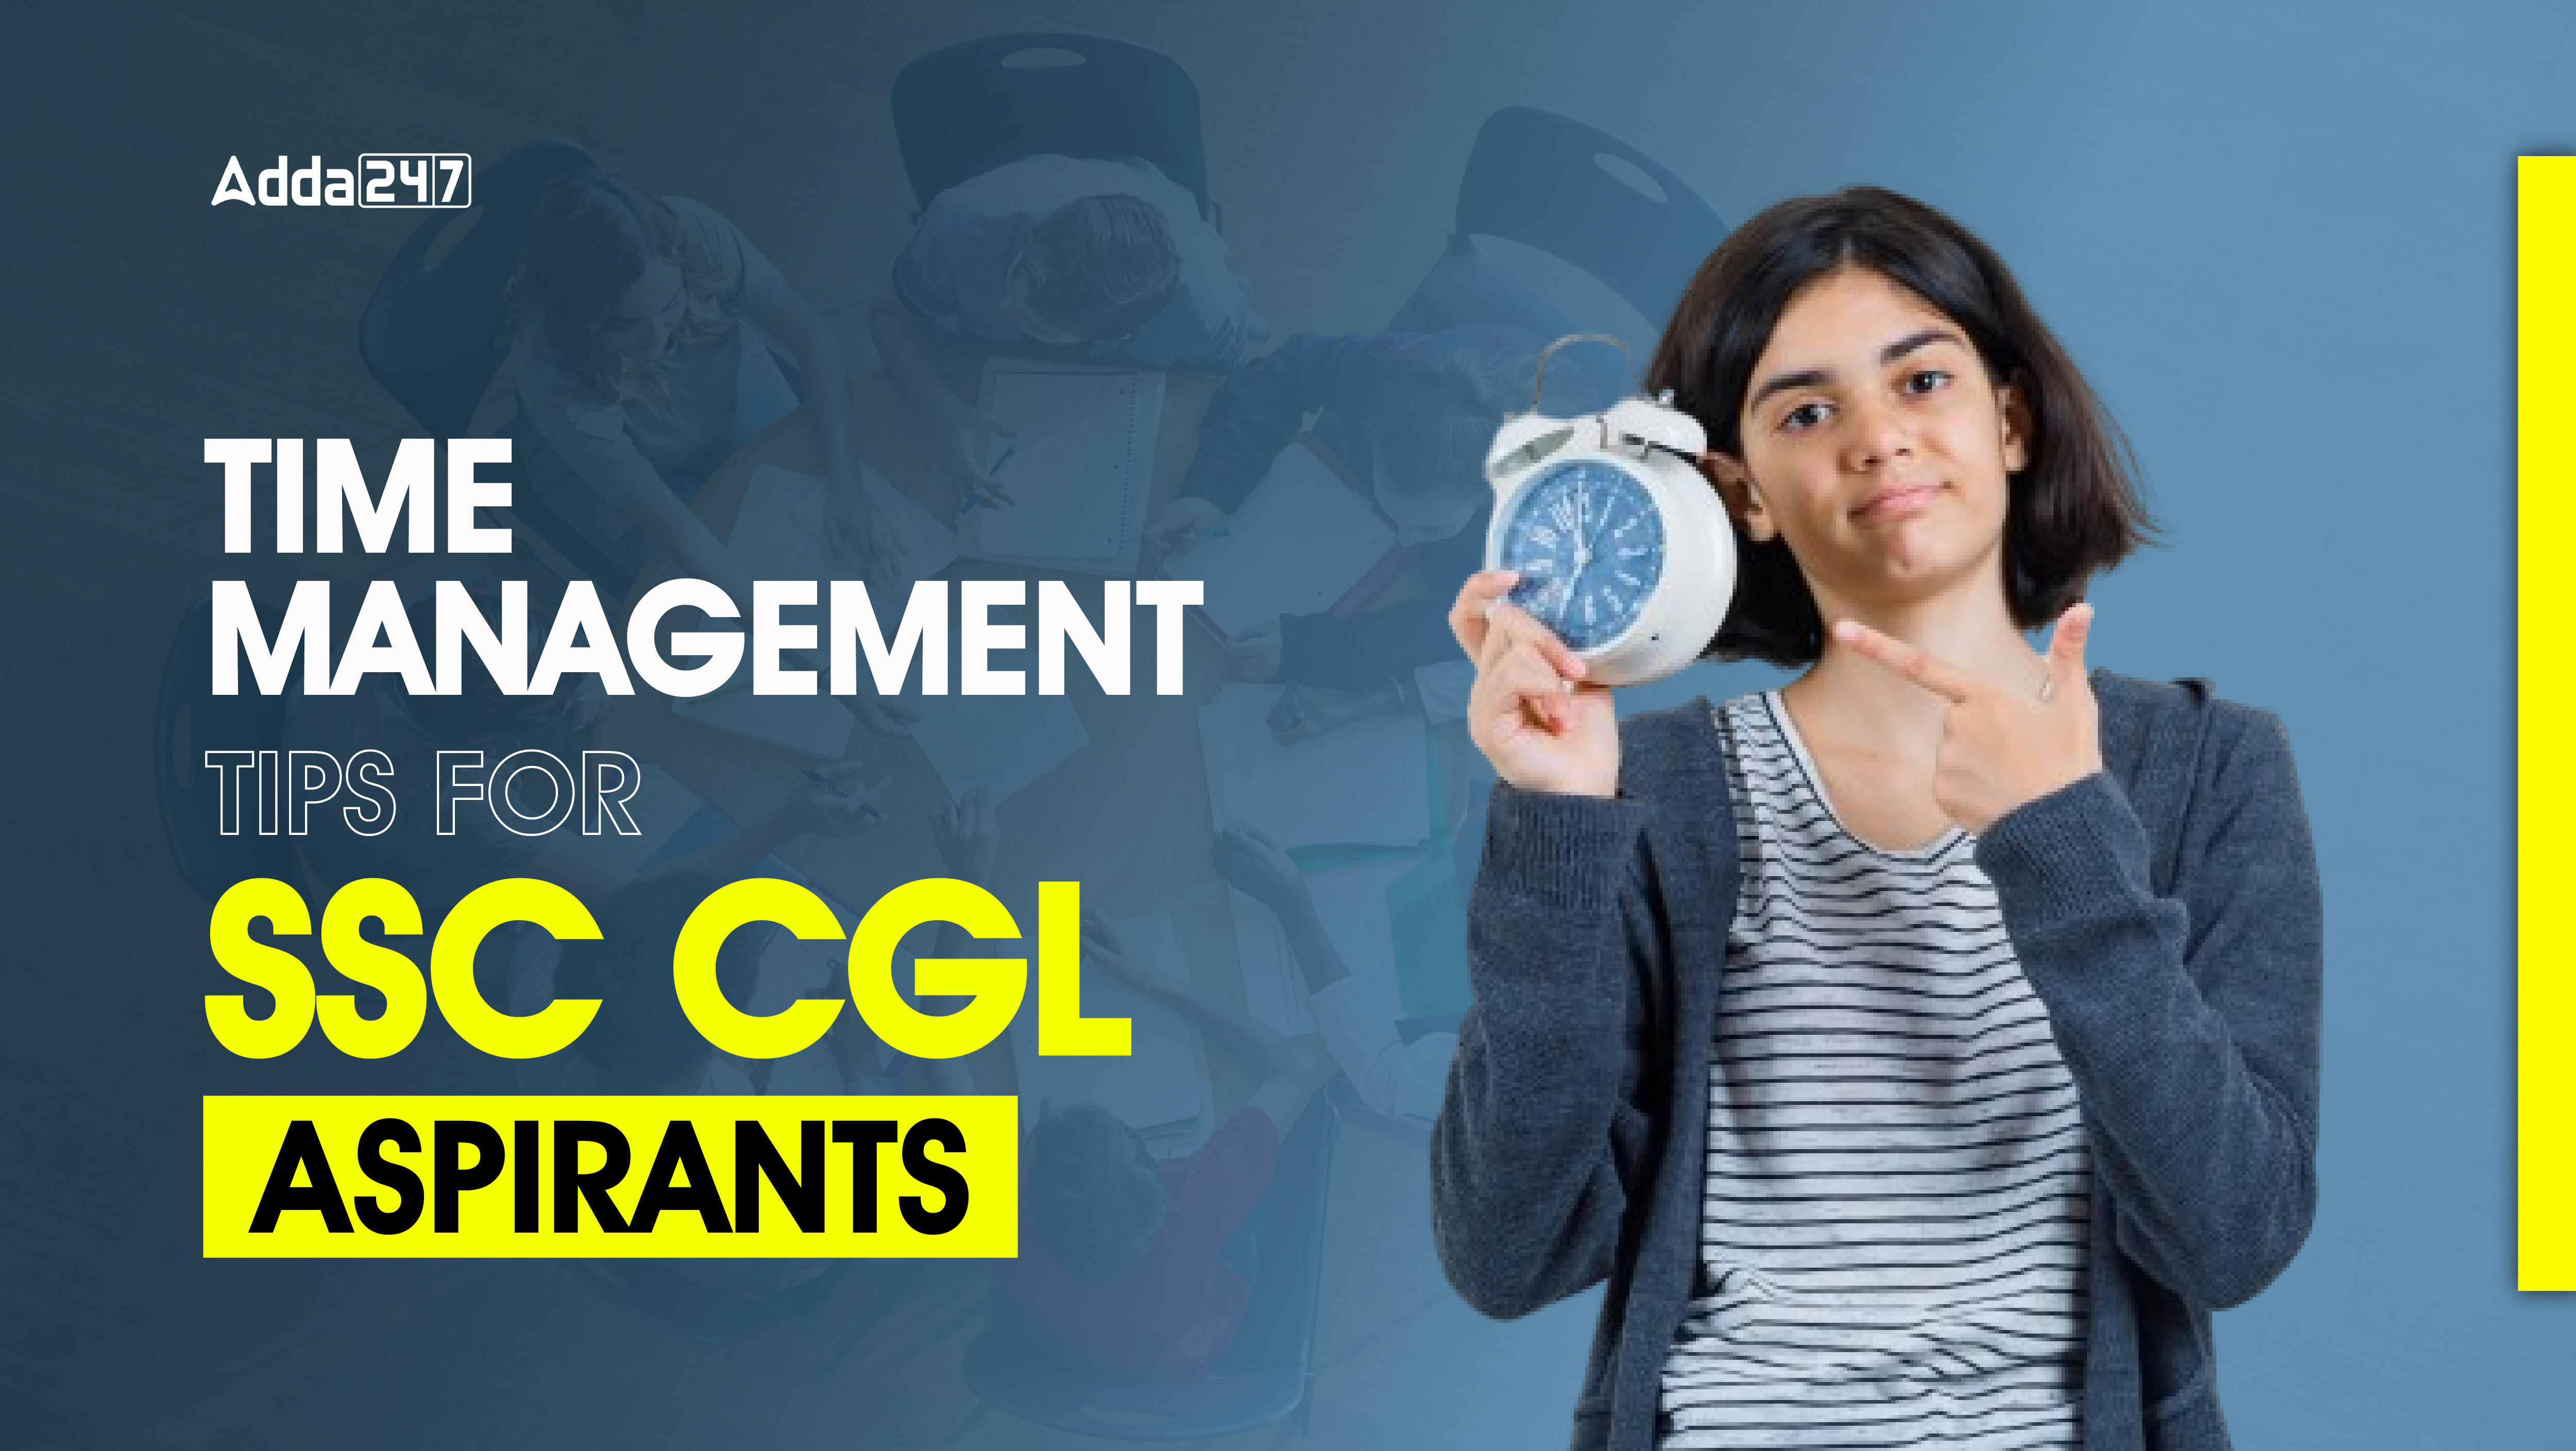 Time management tips for SSC CGL